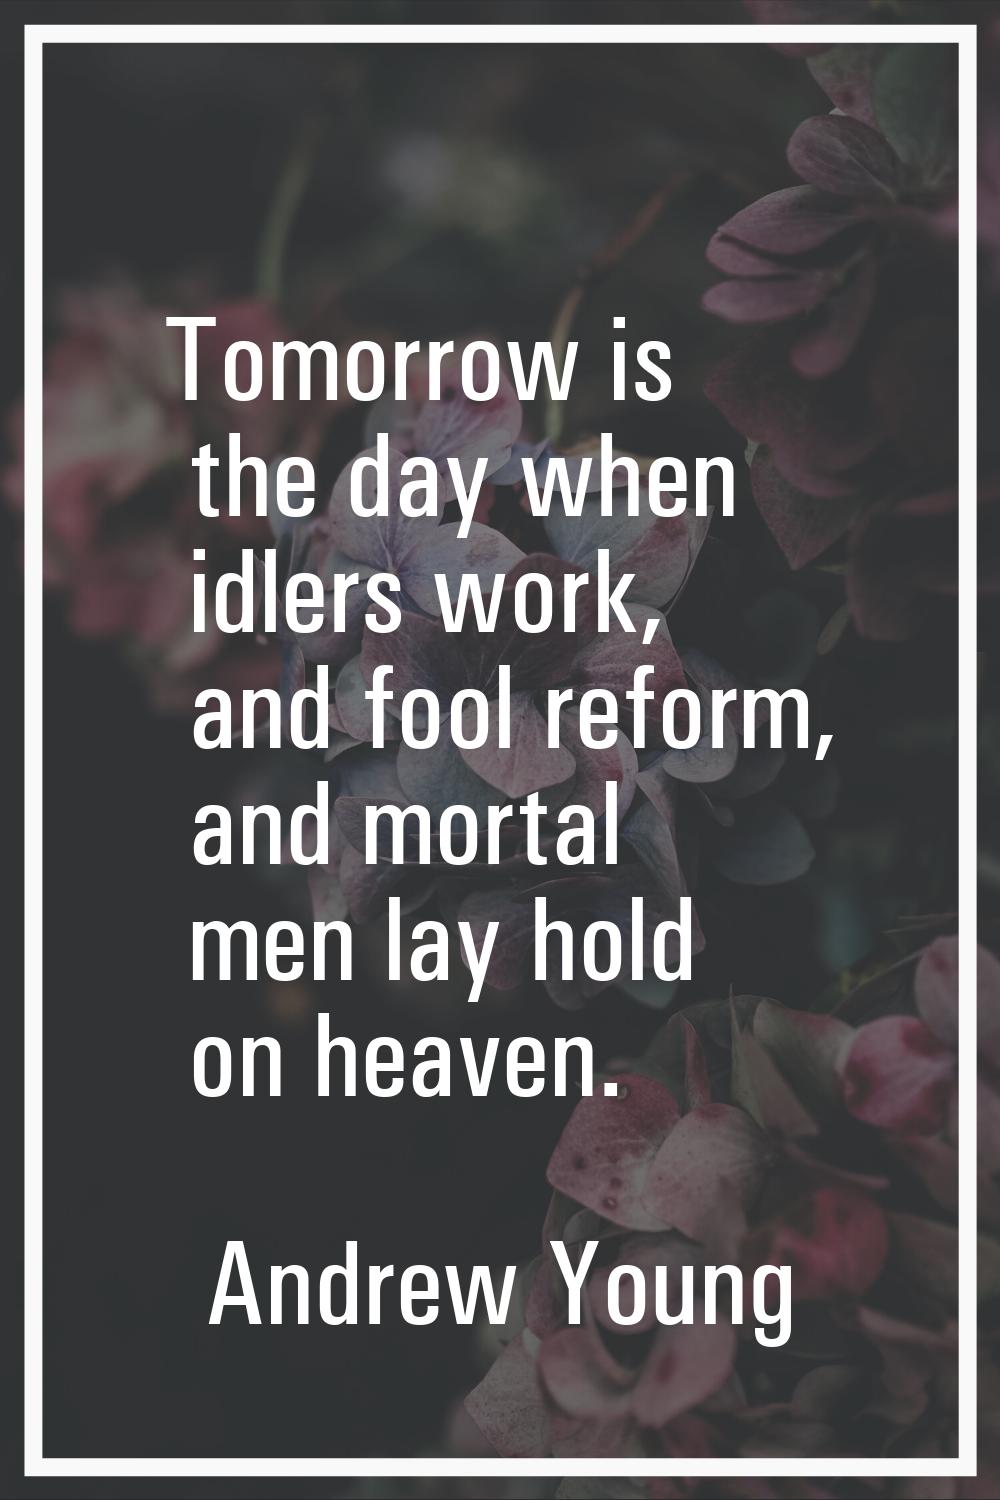 Tomorrow is the day when idlers work, and fool reform, and mortal men lay hold on heaven.